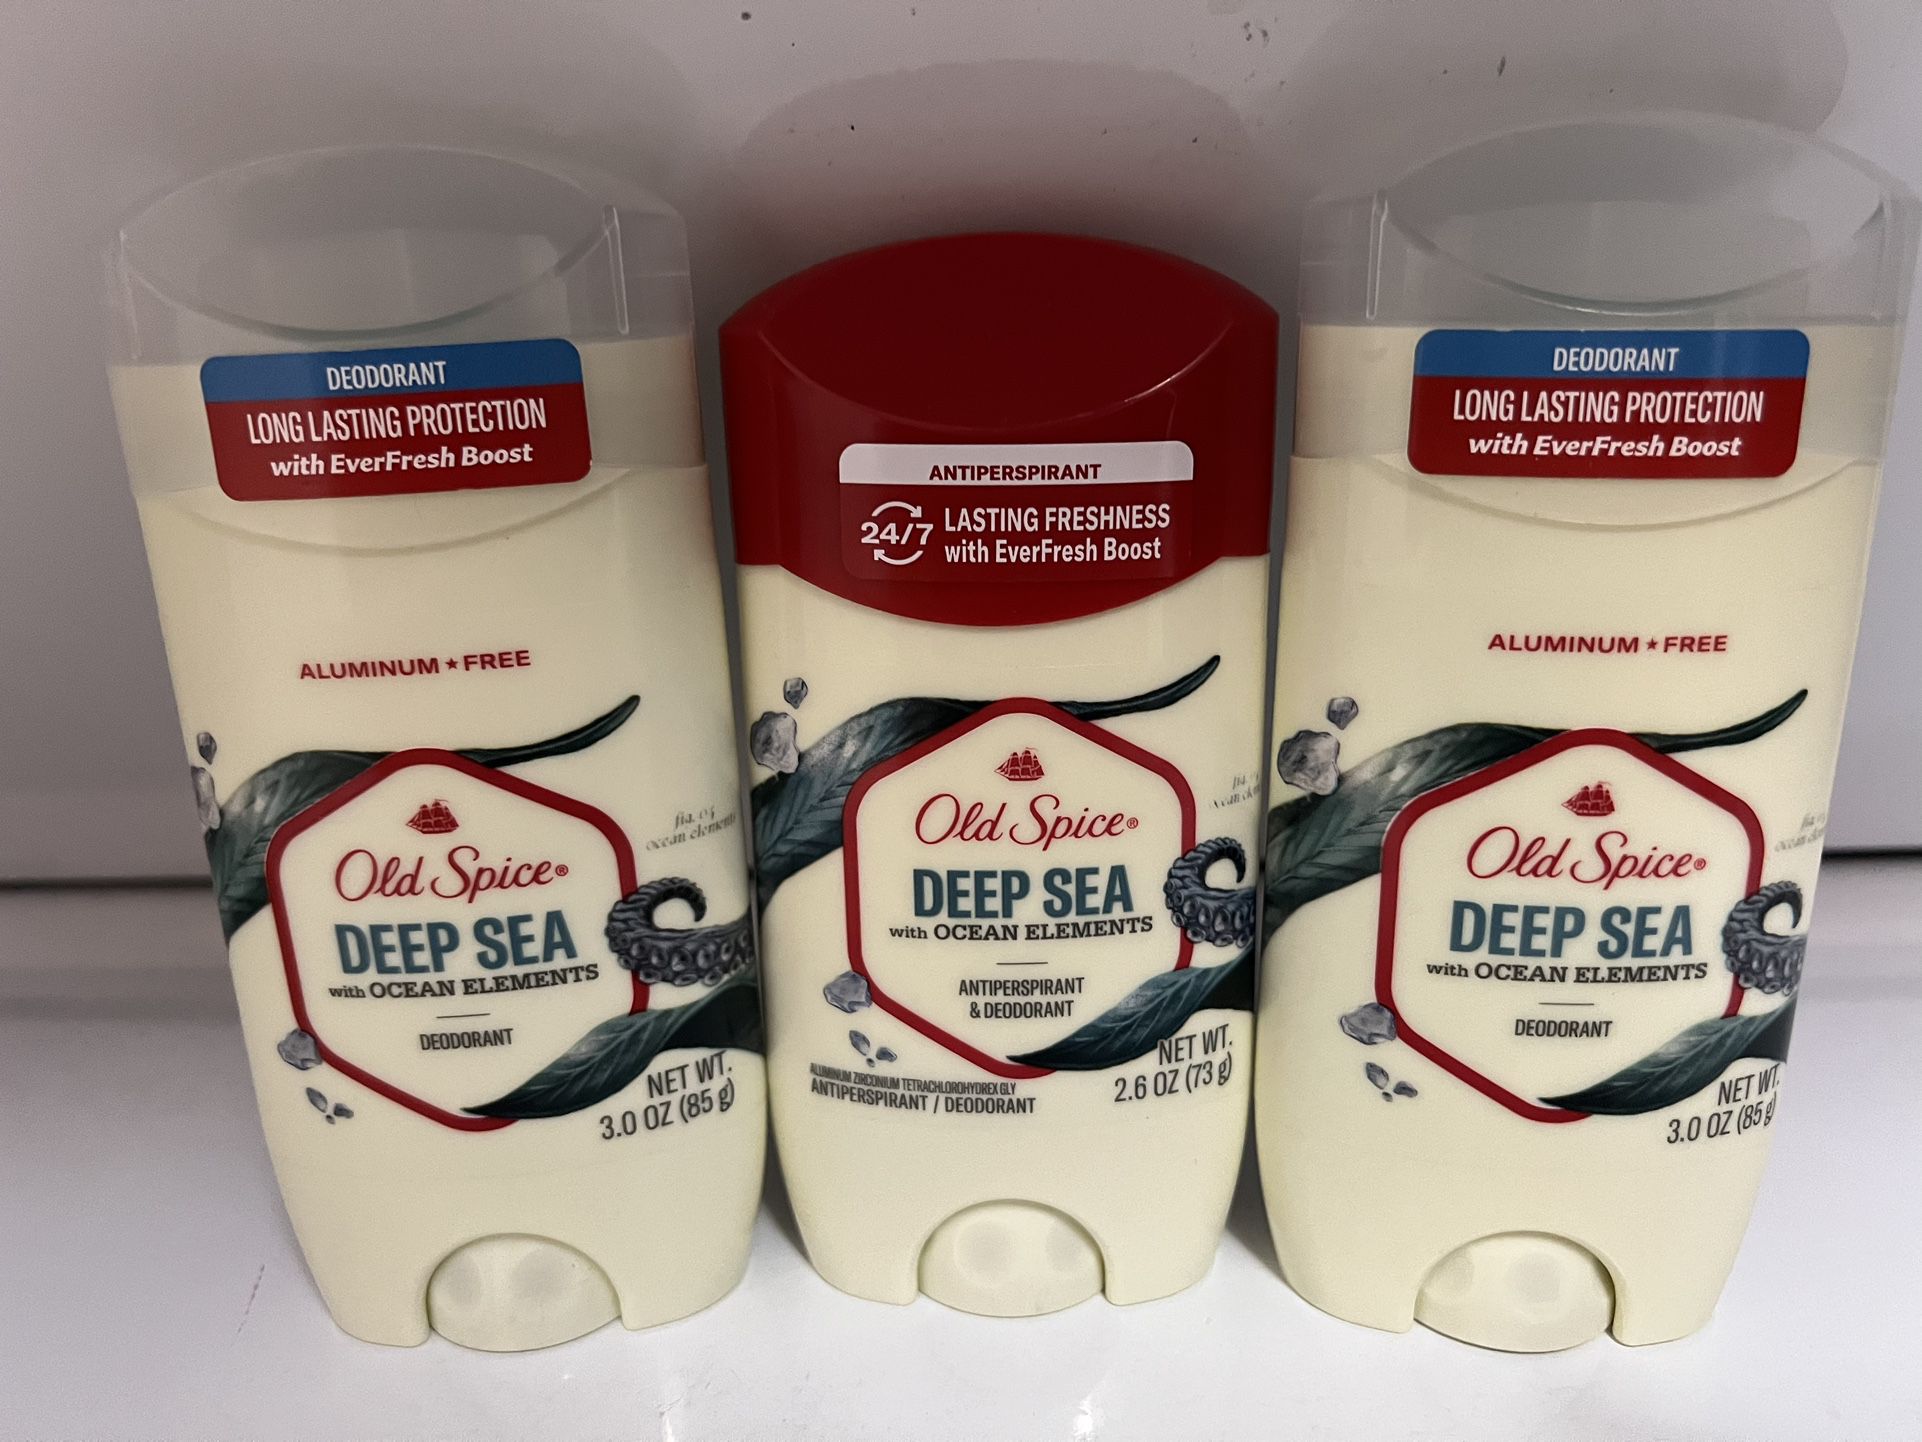 Old Spice deodorant for Men all 3 x $10